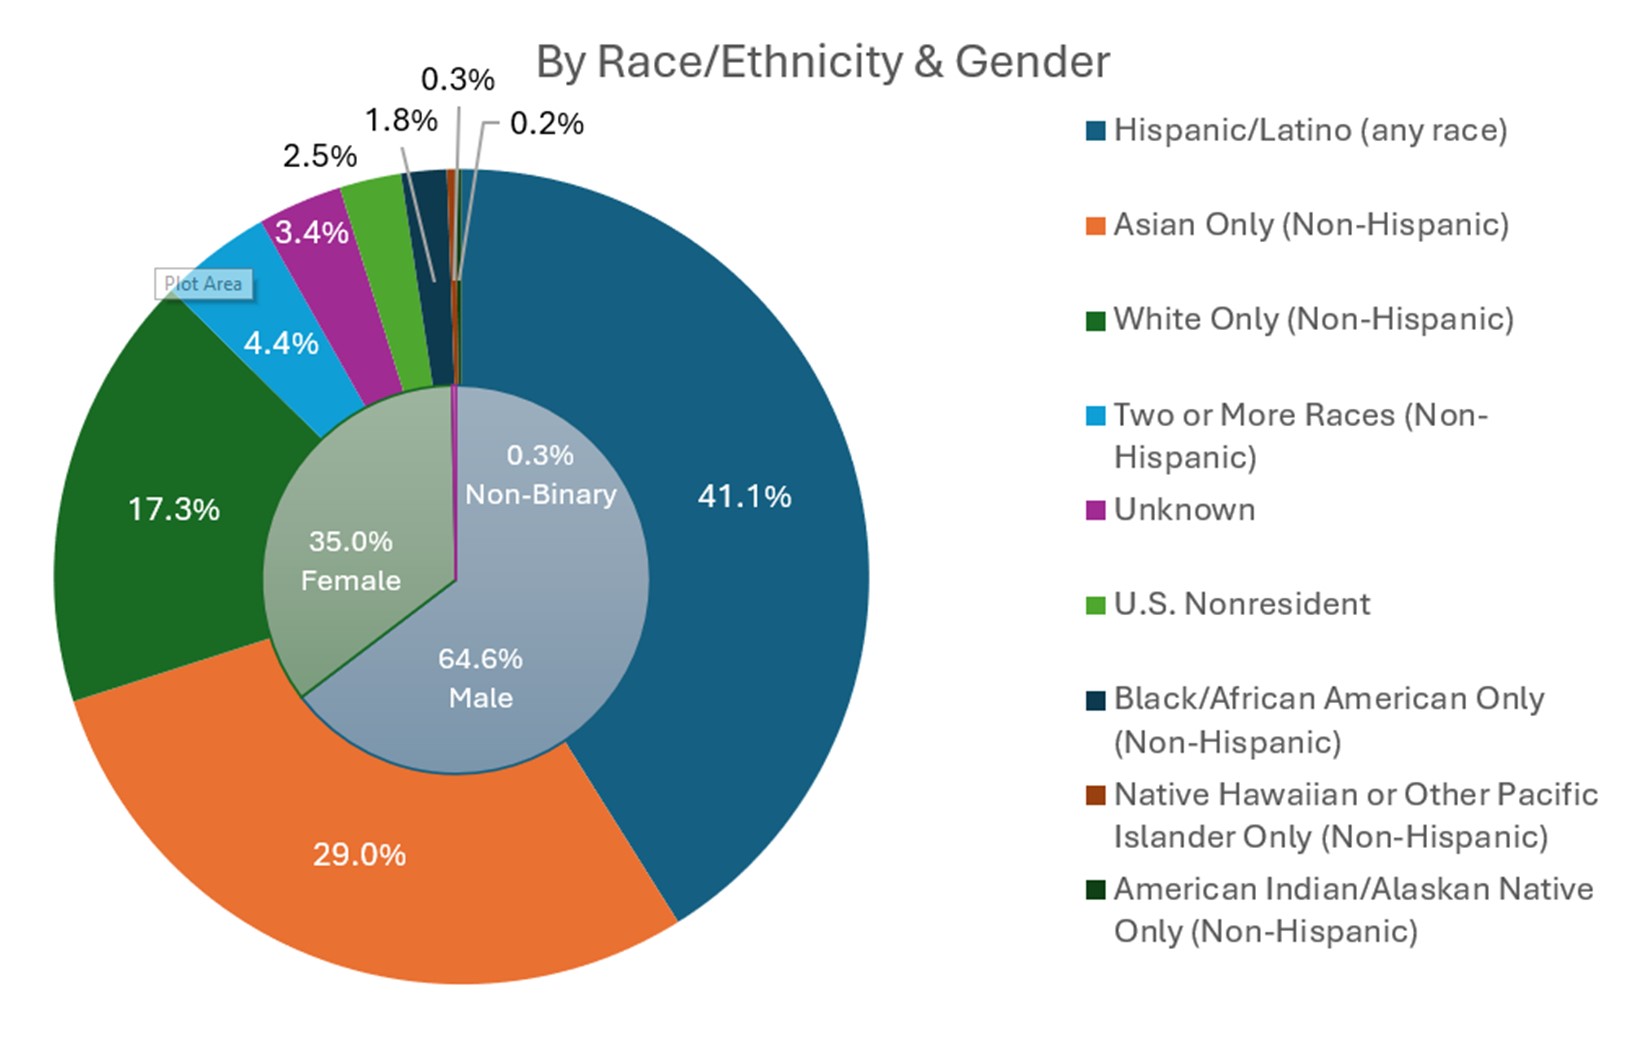 Data on the visitors who came to our spaces broken down by race, ethnicity and gender